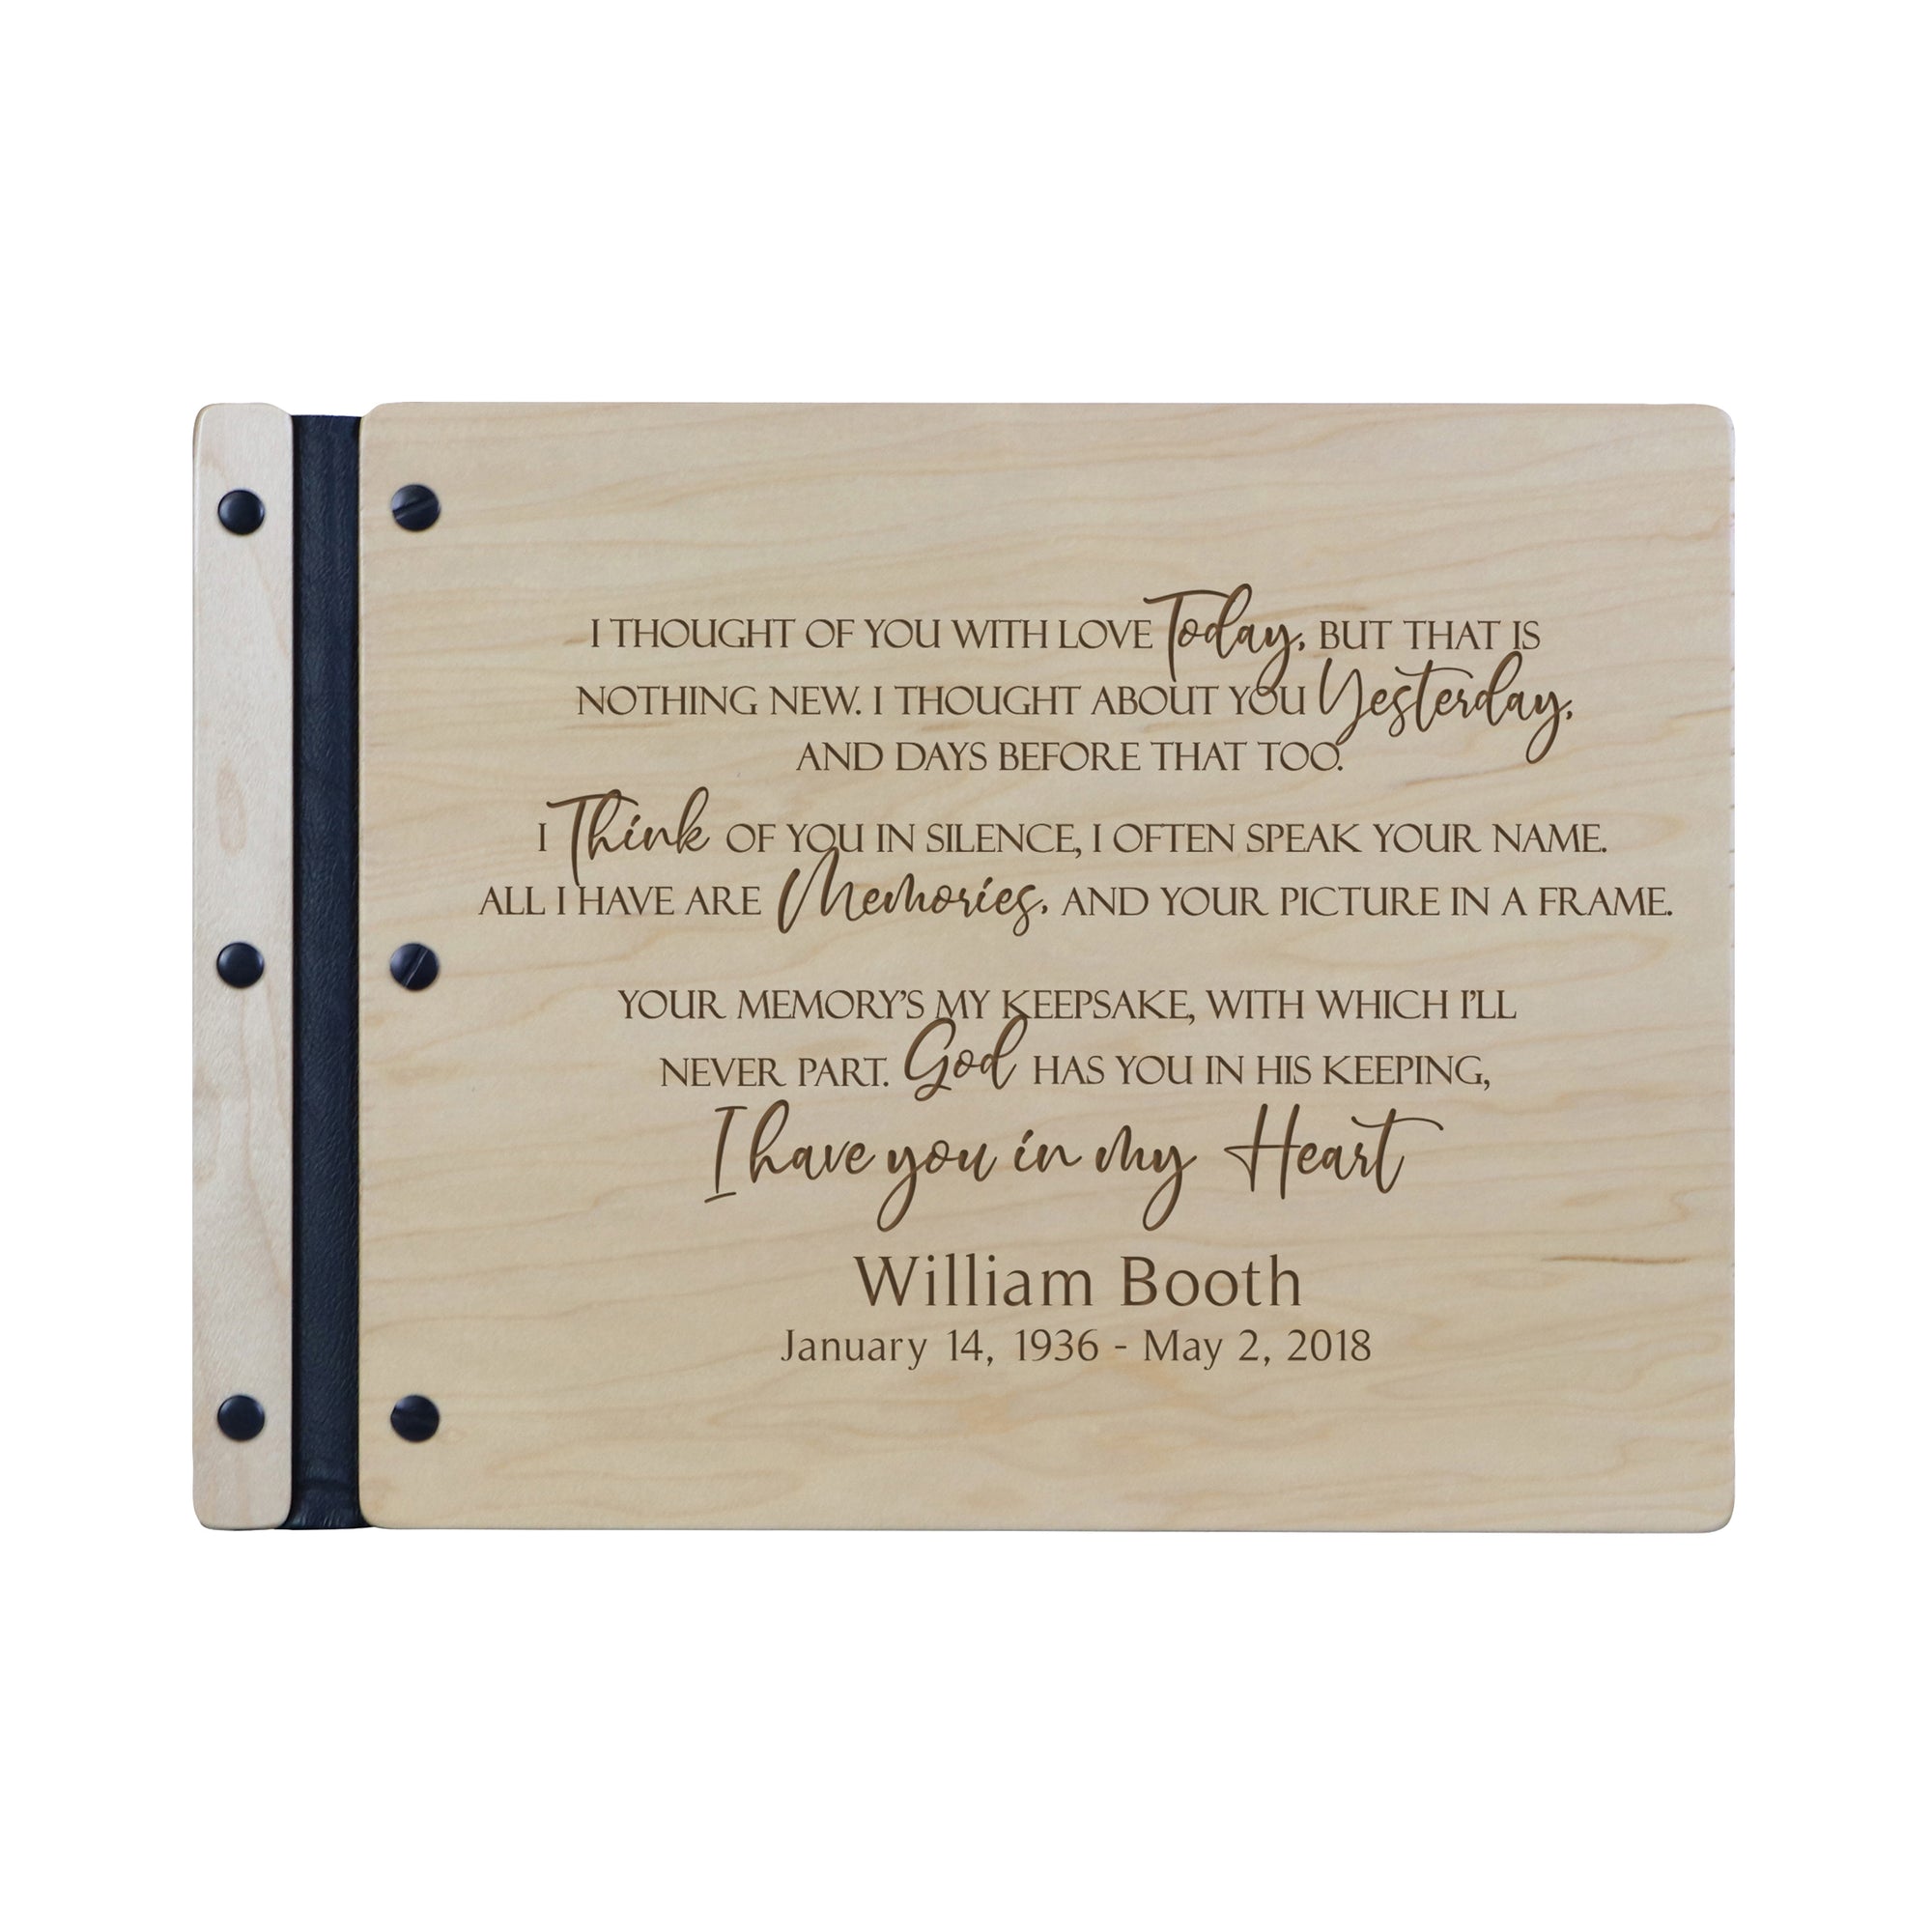 Lifesong Milestones Funeral Guest Book Personalized Wooden Memorial Guestbook Celebration of Life Guest Book Remembrance In Loving Memory Keepsake 13.375” x 10” x .75”-I Thought Of You